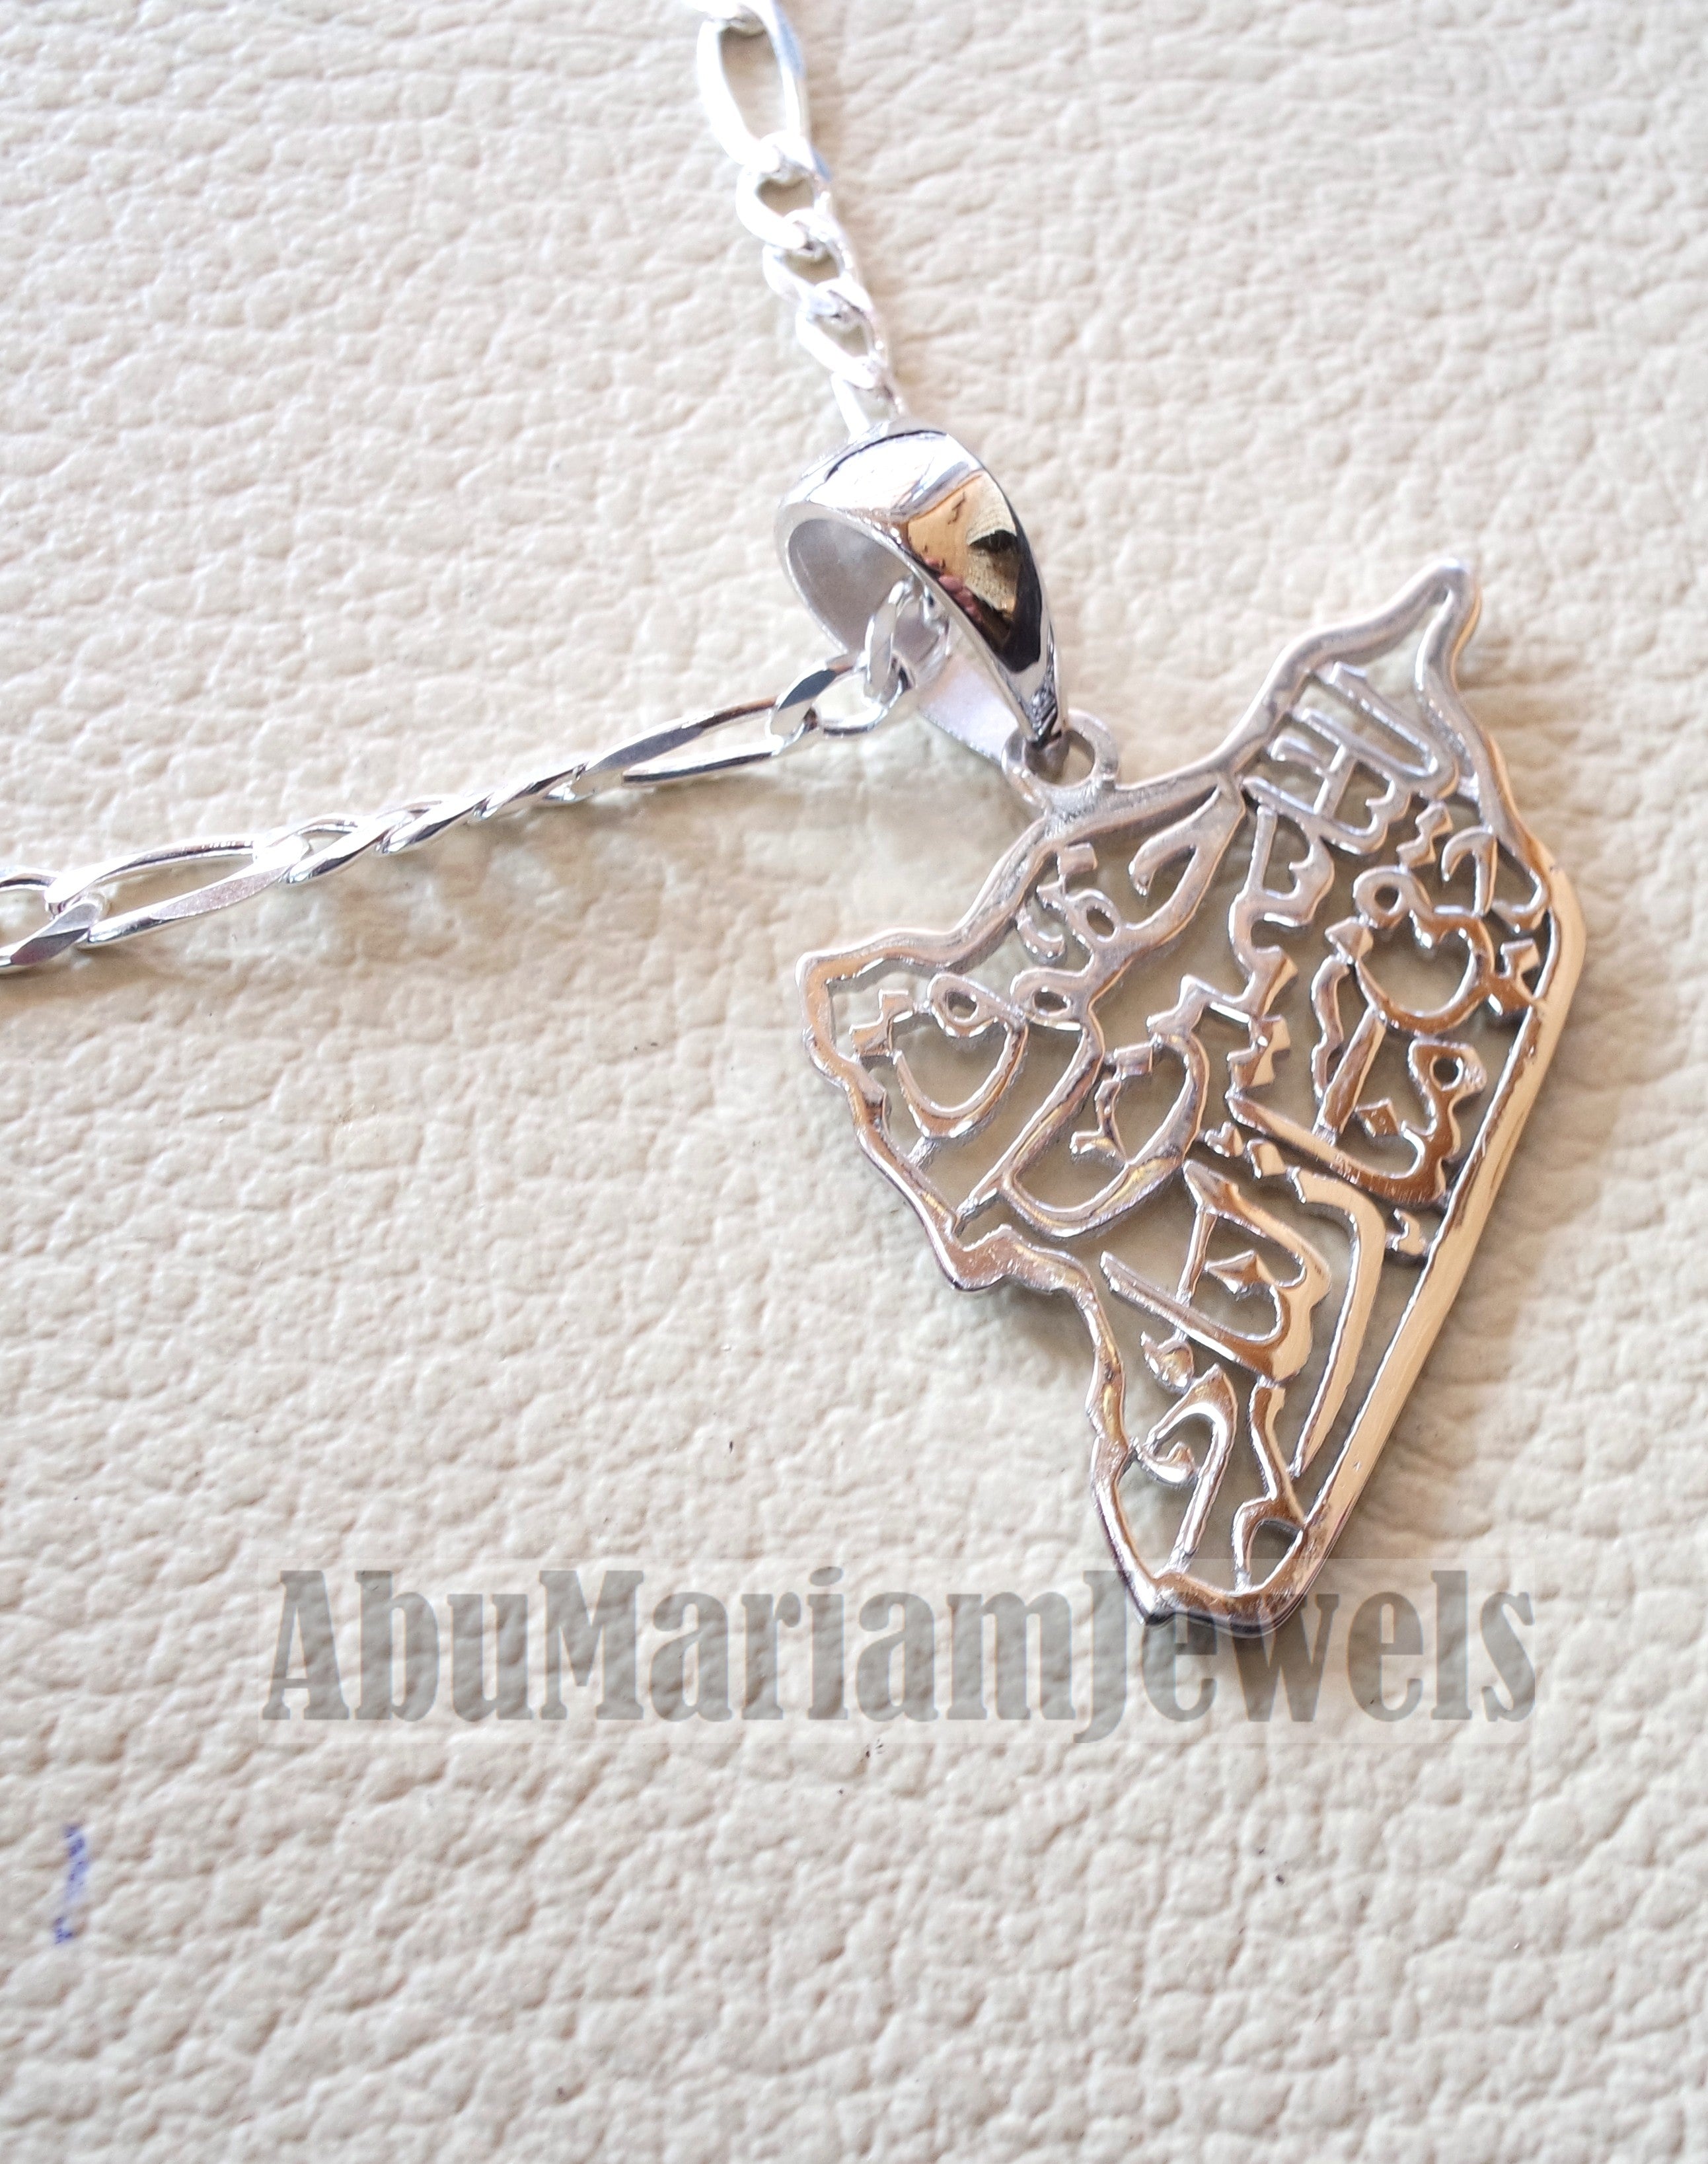 Syria map pendant with thick chain famous poem verse sterling silver 925 k high quality jewelry arabic fast shipping خارطه سوريا